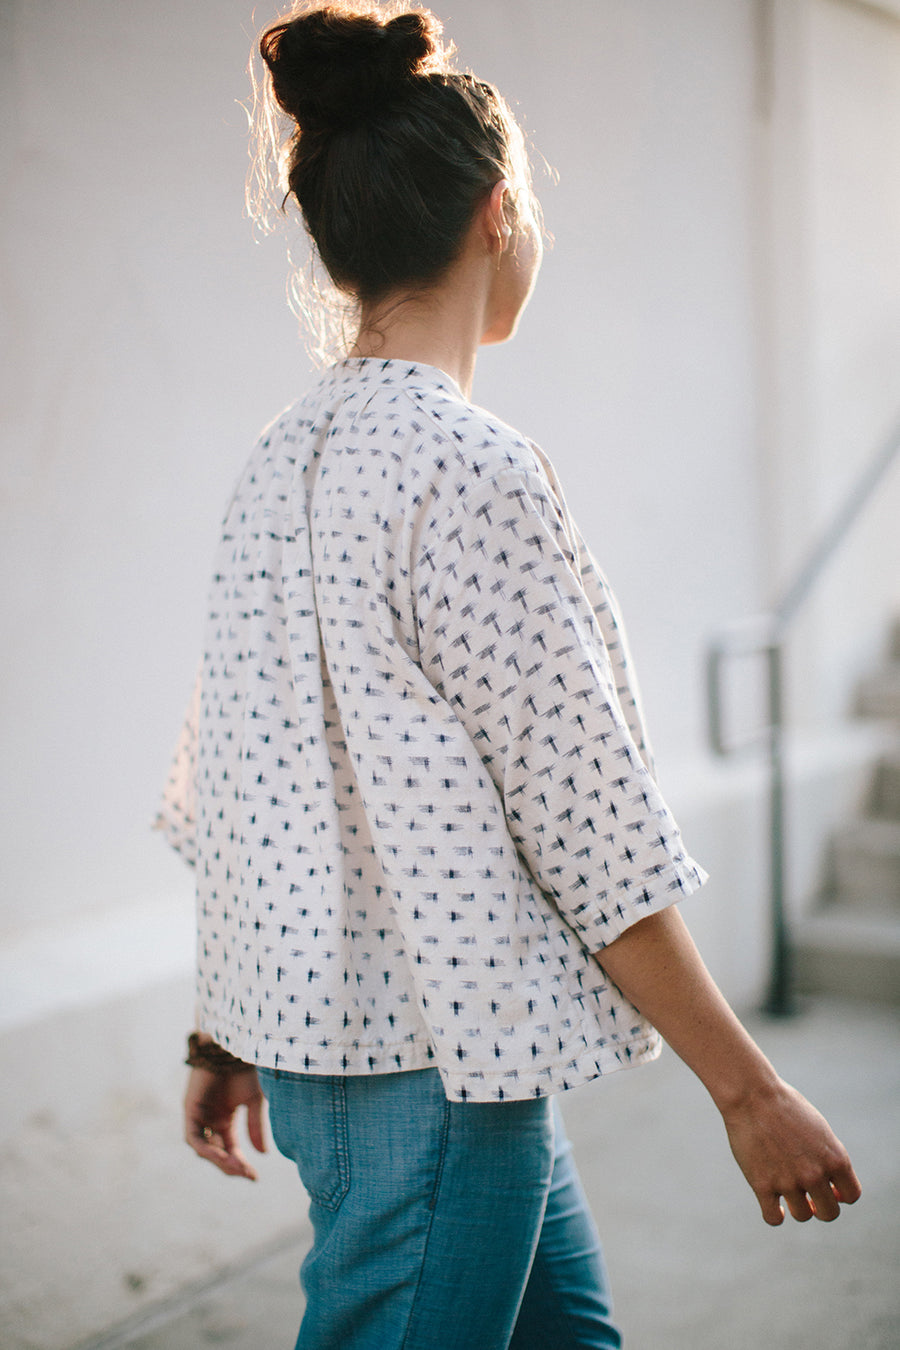 The Matcha Top Sewing Pattern